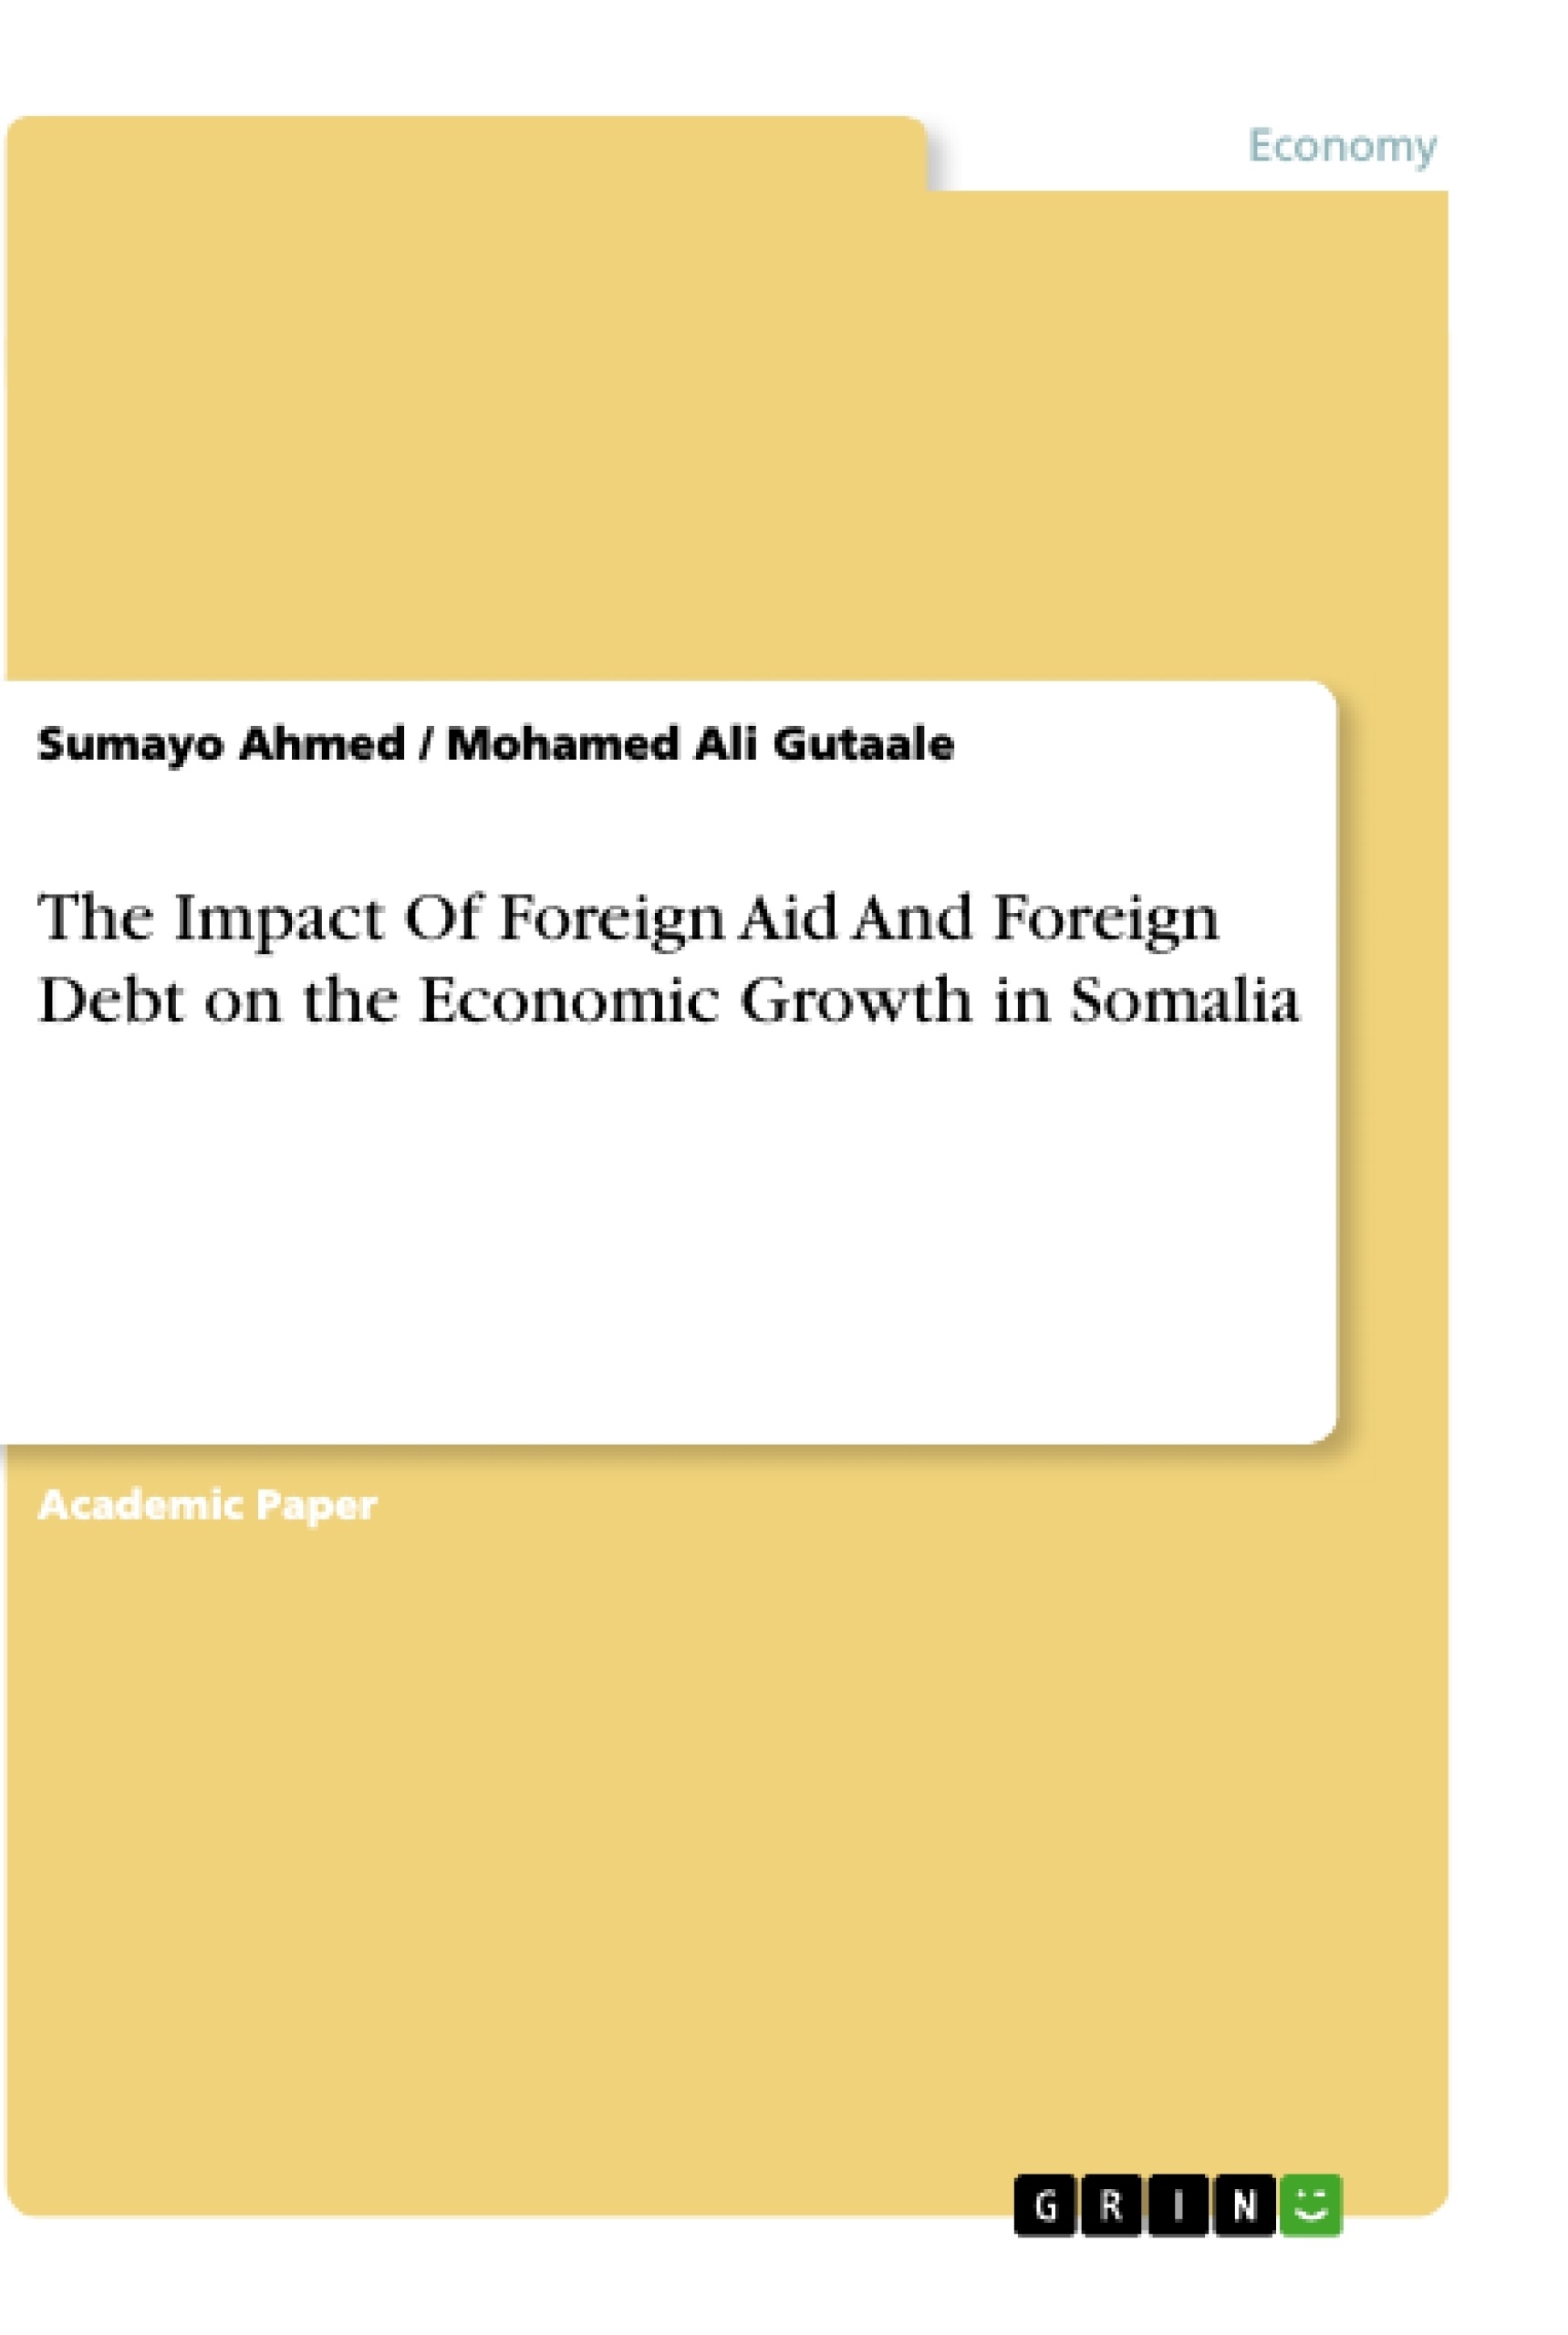 Title: The Impact Of Foreign Aid And Foreign Debt on the Economic Growth in Somalia